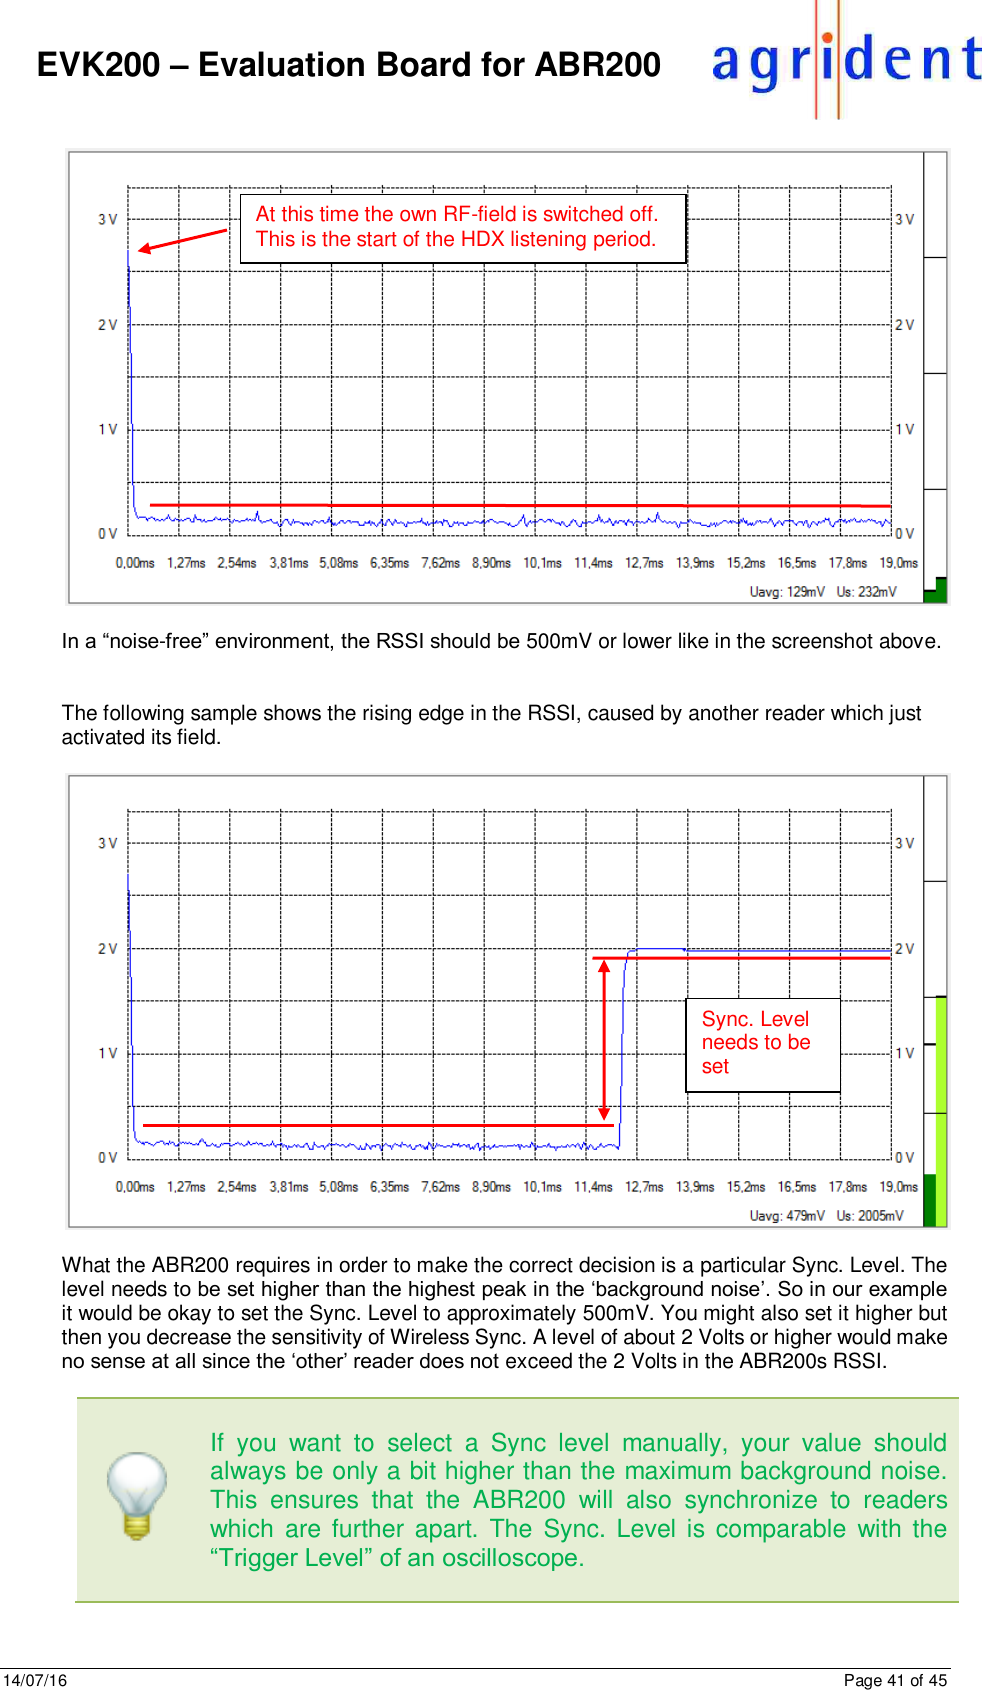 14/07/16      Page 41 of 45      EVK200 – Evaluation Board for ABR200    In a “noise-free” environment, the RSSI should be 500mV or lower like in the screenshot above.    The following sample shows the rising edge in the RSSI, caused by another reader which just activated its field.    What the ABR200 requires in order to make the correct decision is a particular Sync. Level. The level needs to be set higher than the highest peak in the ‘background noise’. So in our example it would be okay to set the Sync. Level to approximately 500mV. You might also set it higher but then you decrease the sensitivity of Wireless Sync. A level of about 2 Volts or higher would make no sense at all since the ‘other’ reader does not exceed the 2 Volts in the ABR200s RSSI.       If  you  want  to  select  a  Sync  level  manually,  your  value  should always be only a bit higher than the maximum background noise. This  ensures  that  the  ABR200  will  also  synchronize  to  readers which  are further apart. The Sync. Level is comparable  with  the “Trigger Level” of an oscilloscope.    At this time the own RF-field is switched off. This is the start of the HDX listening period. Sync. Level needs to be set 